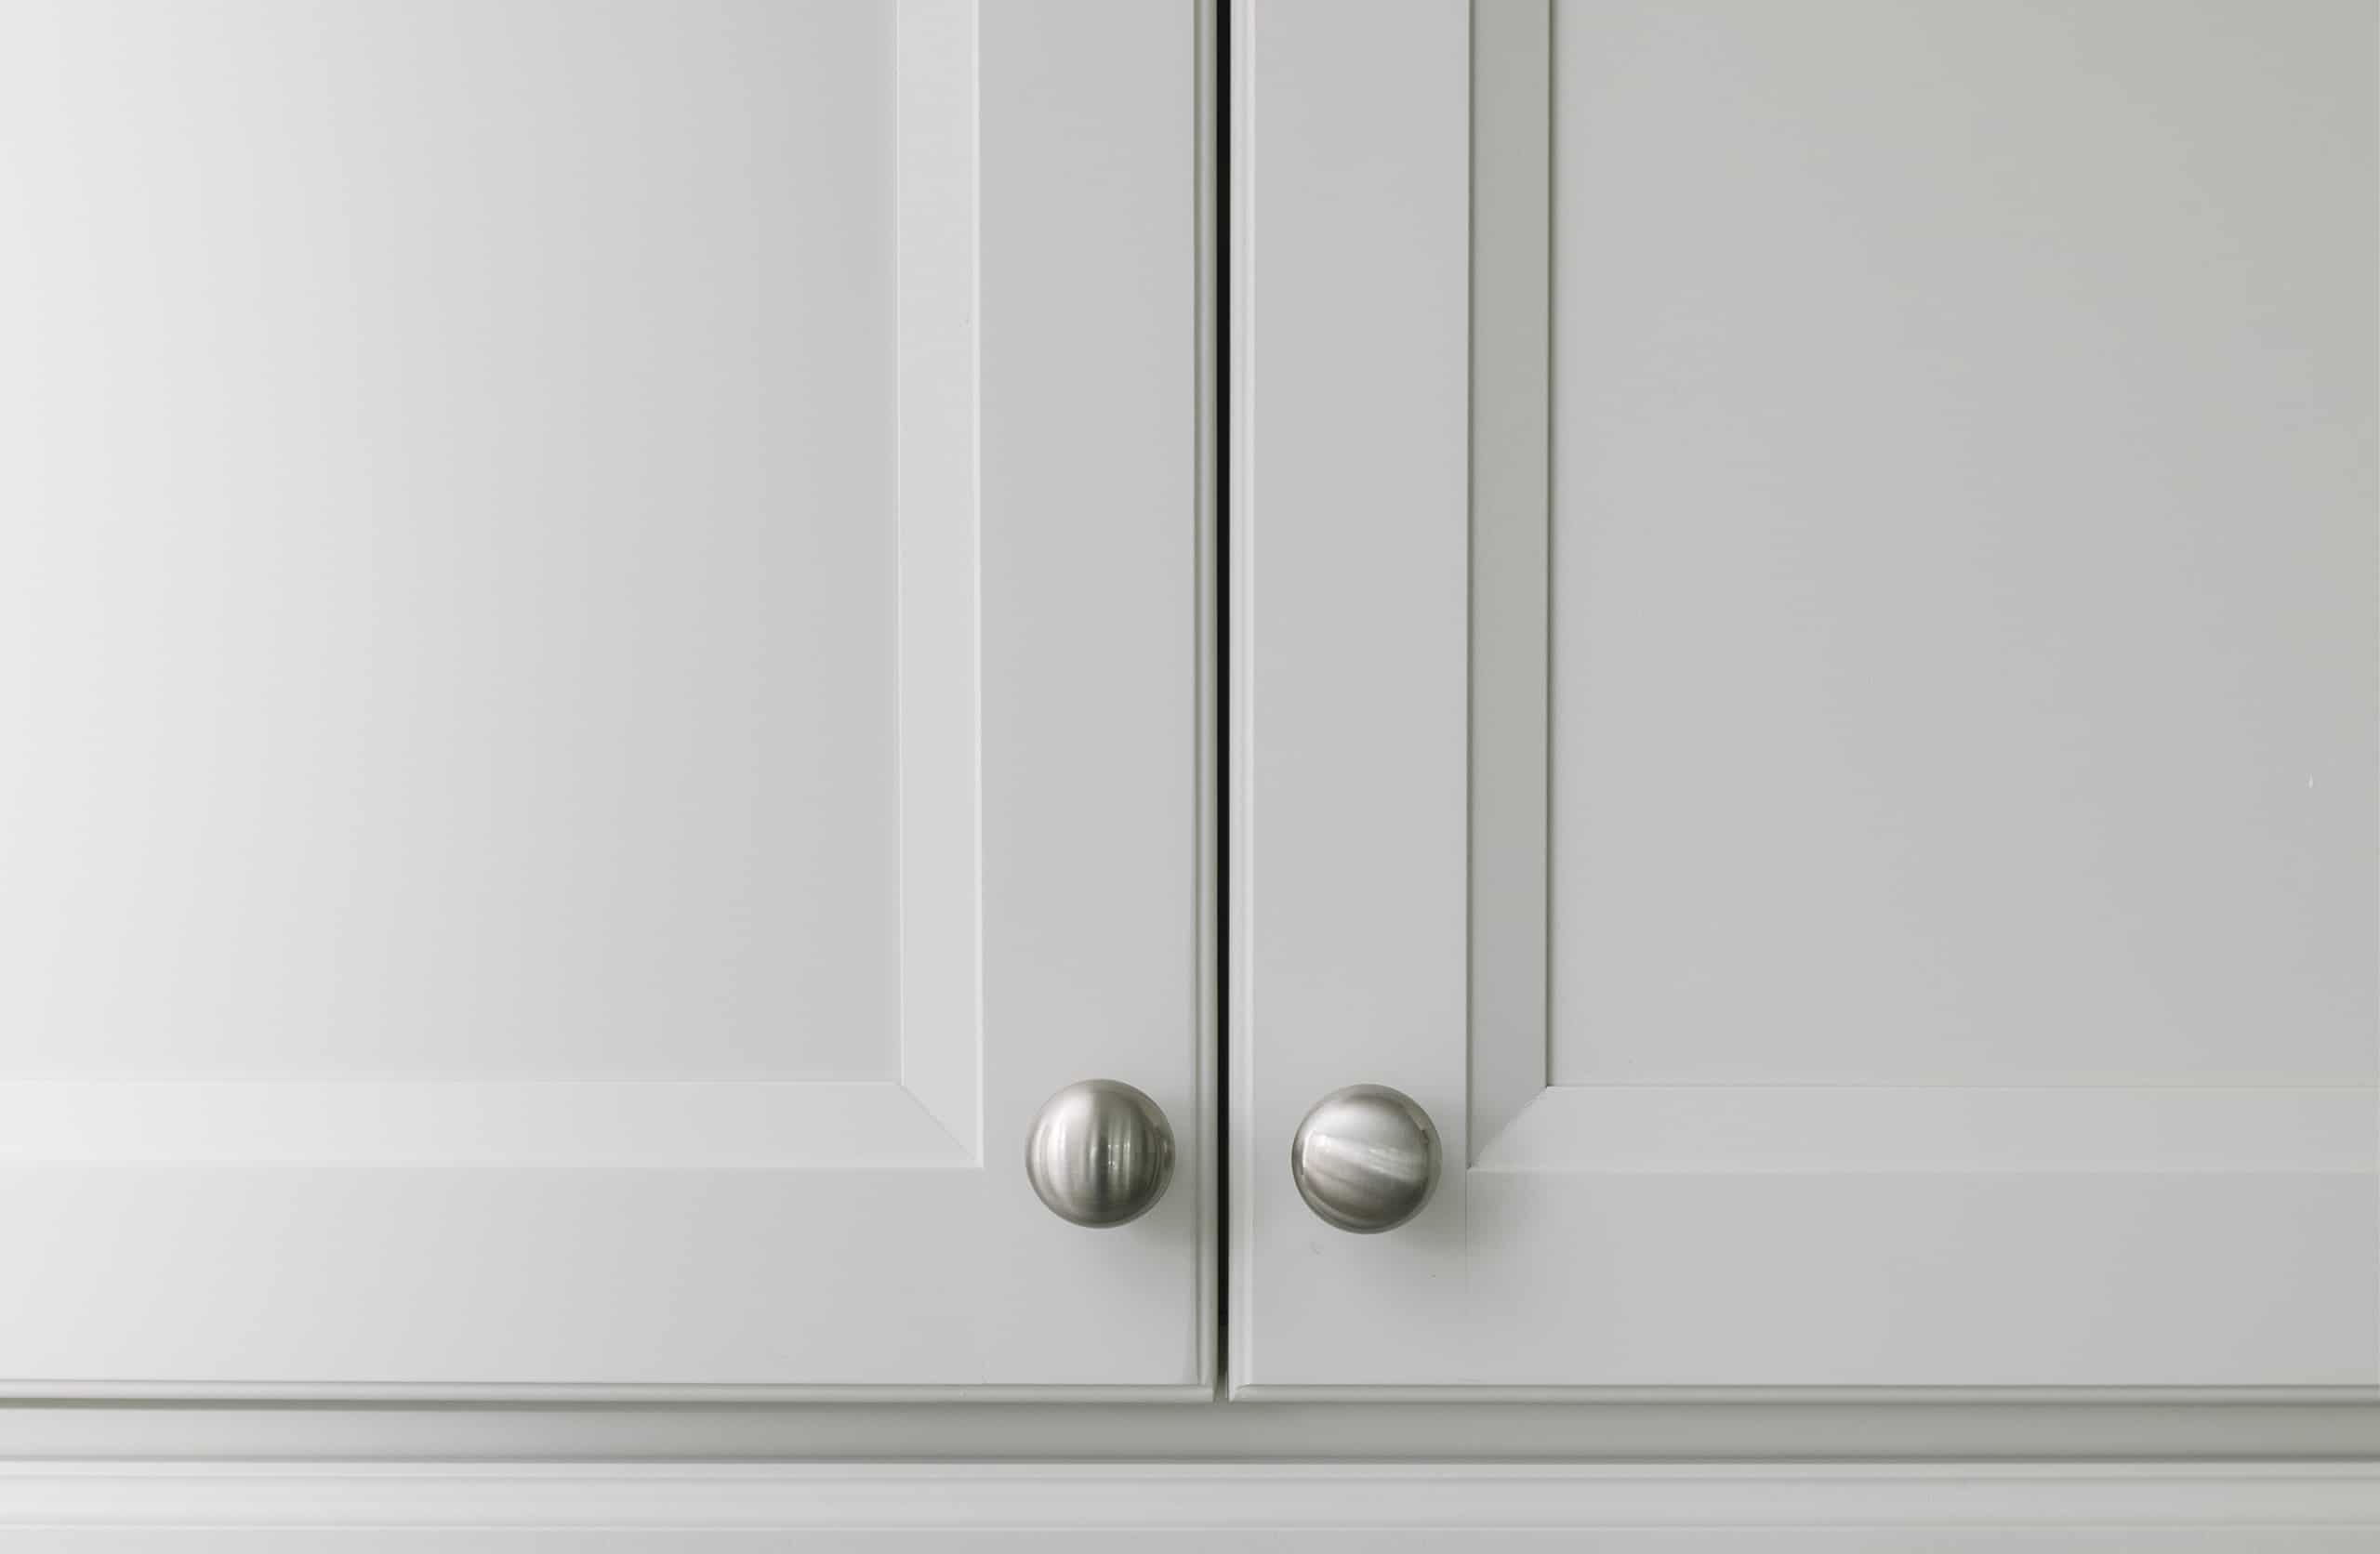 How To Install Knobs On Cabinet Doors, Knobs For Kitchen Cupboard Doors